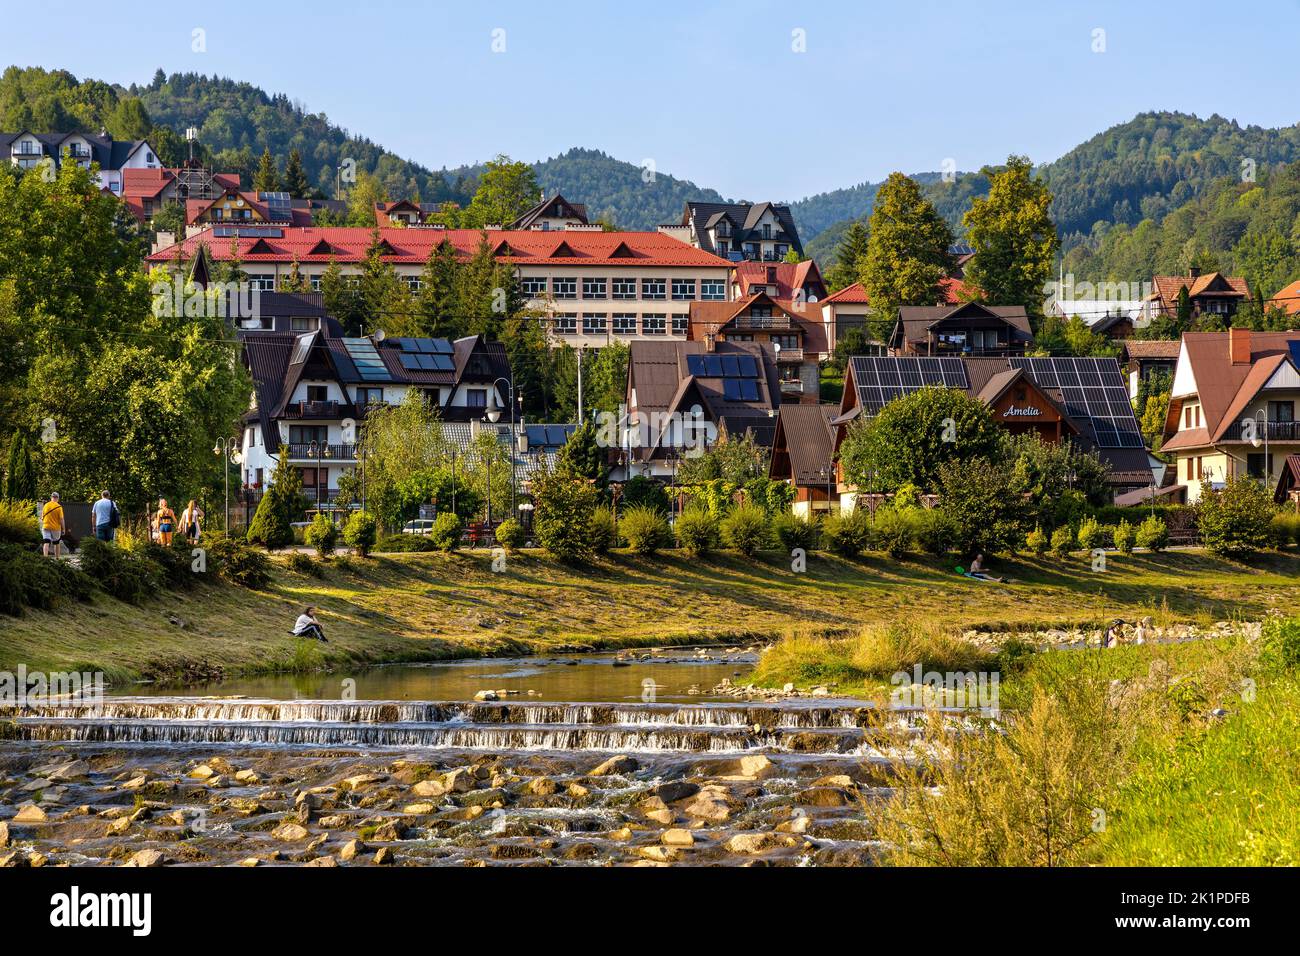 Szczawnica, Poland - August 18, 2022: Pieniny Mountains and vacation houses at Grajcarek creek joining Dunajec river in Szczawnica Zdroj springs resor Stock Photo